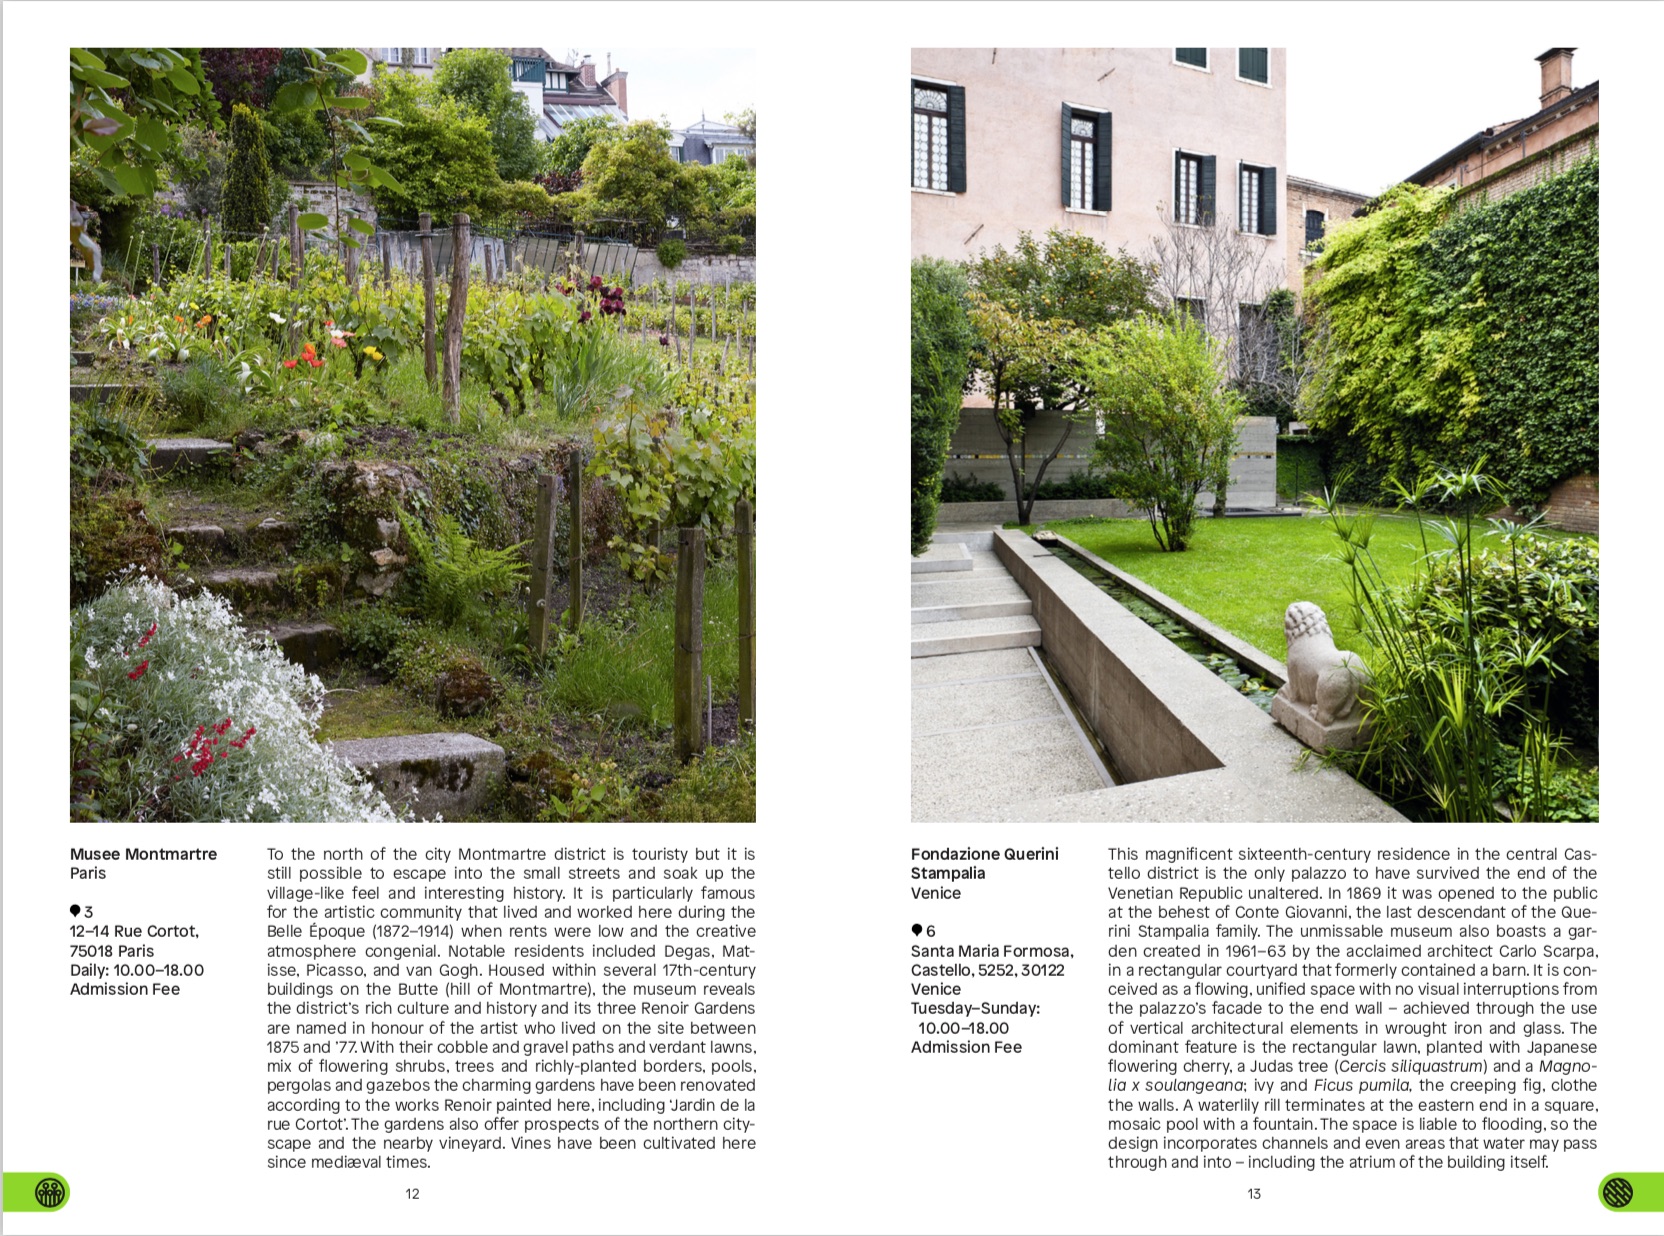 By Toby Musgrave from Green Escapes: The Guide to Secret Urban Gardens copyright Phaidon 2018